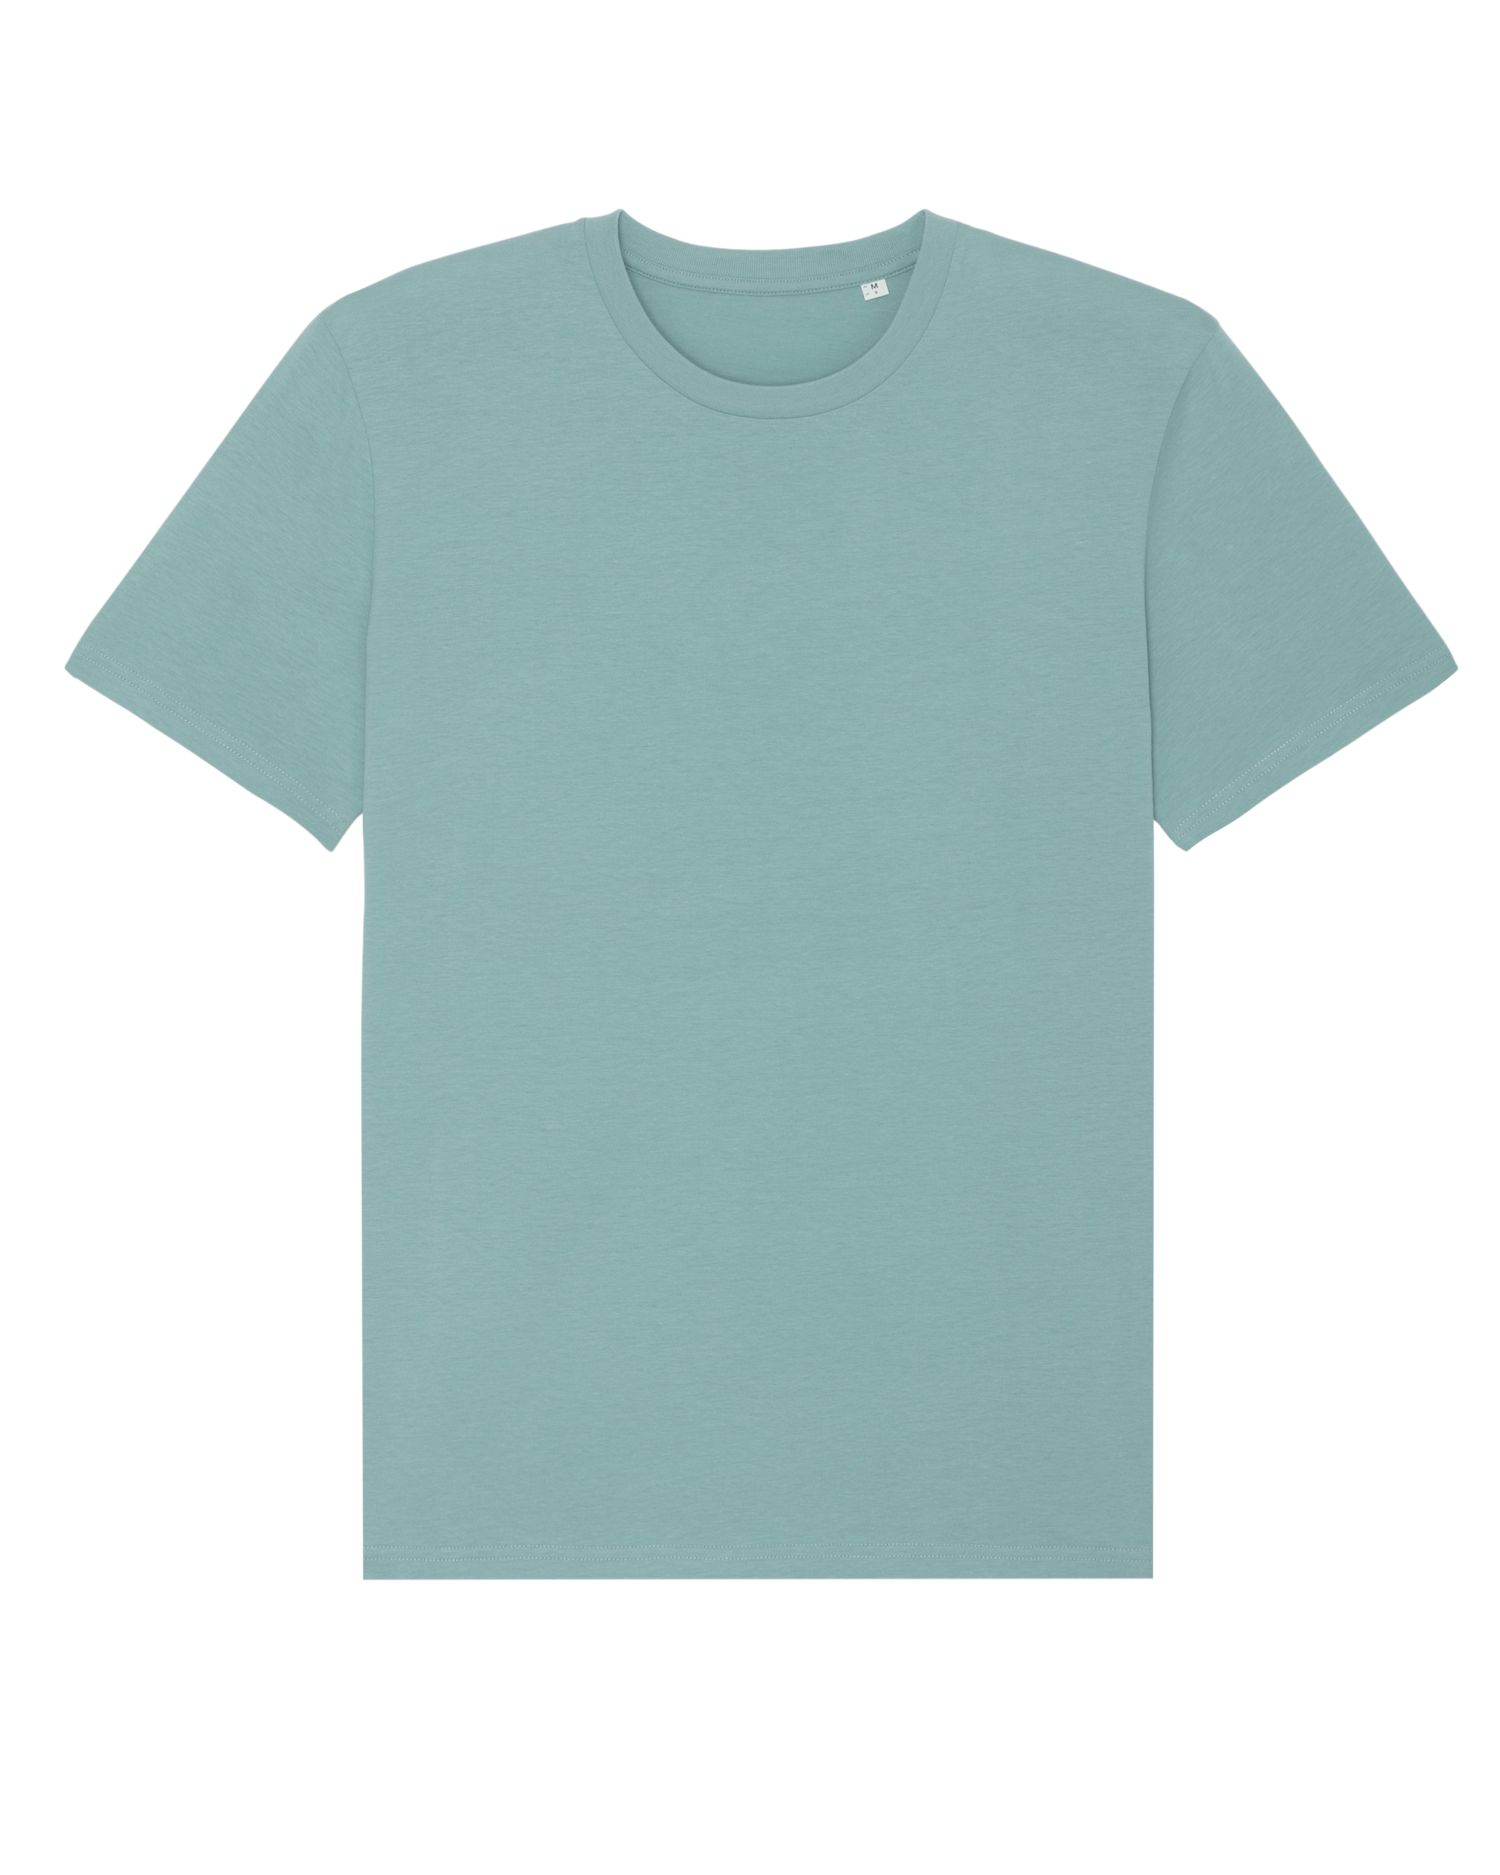 T-Shirt Creator in Farbe Teal Monstera